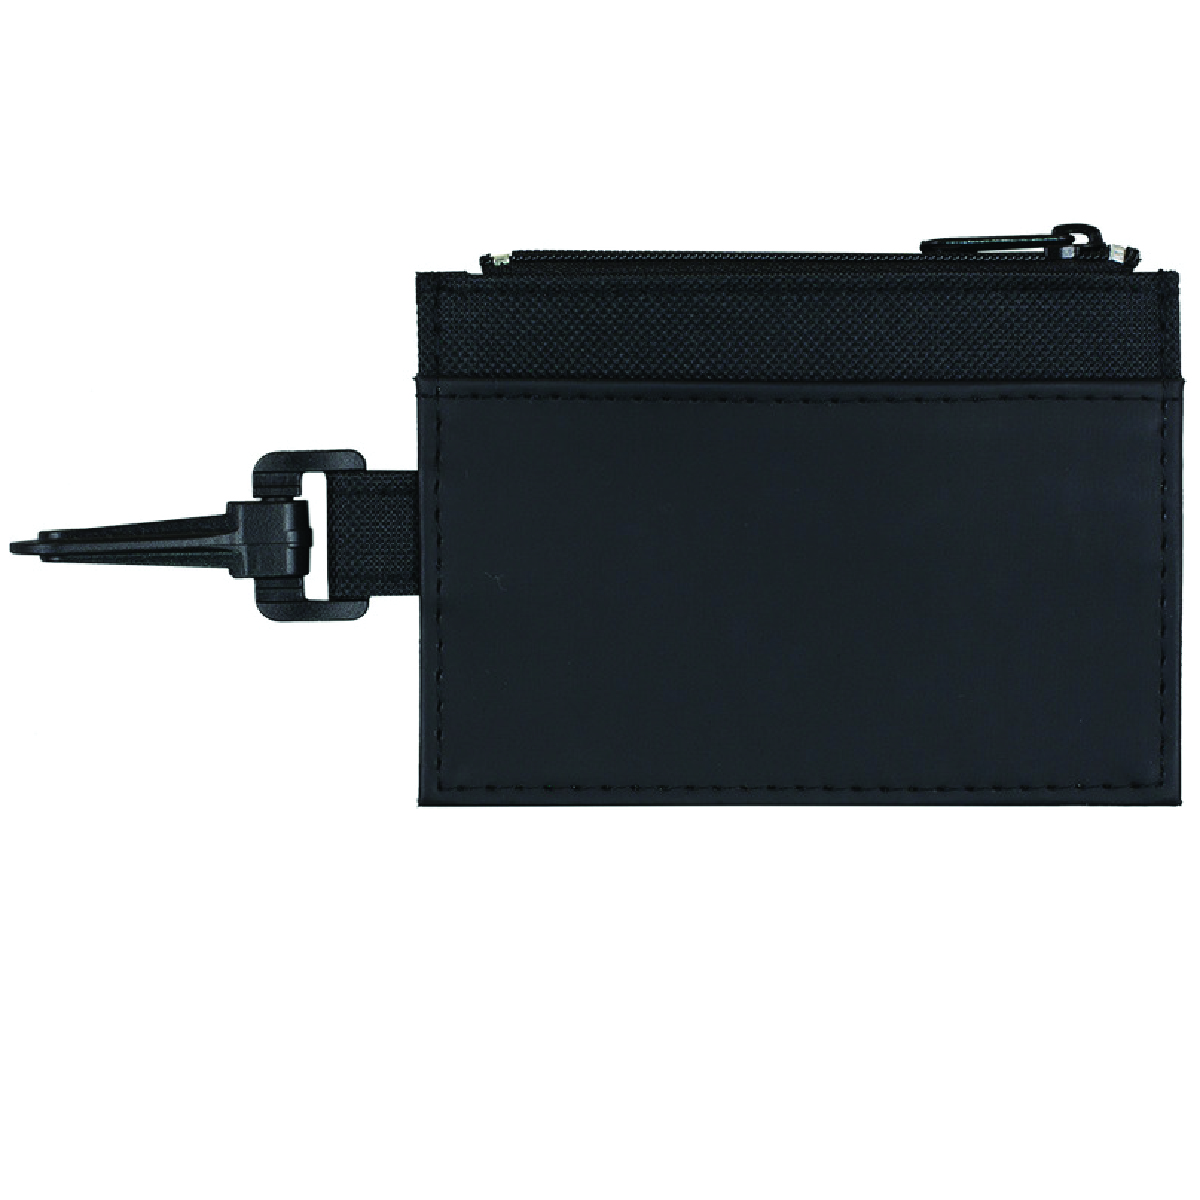 Black The Regent ID Holder with Zipper Wallet and Plastic Carabiner